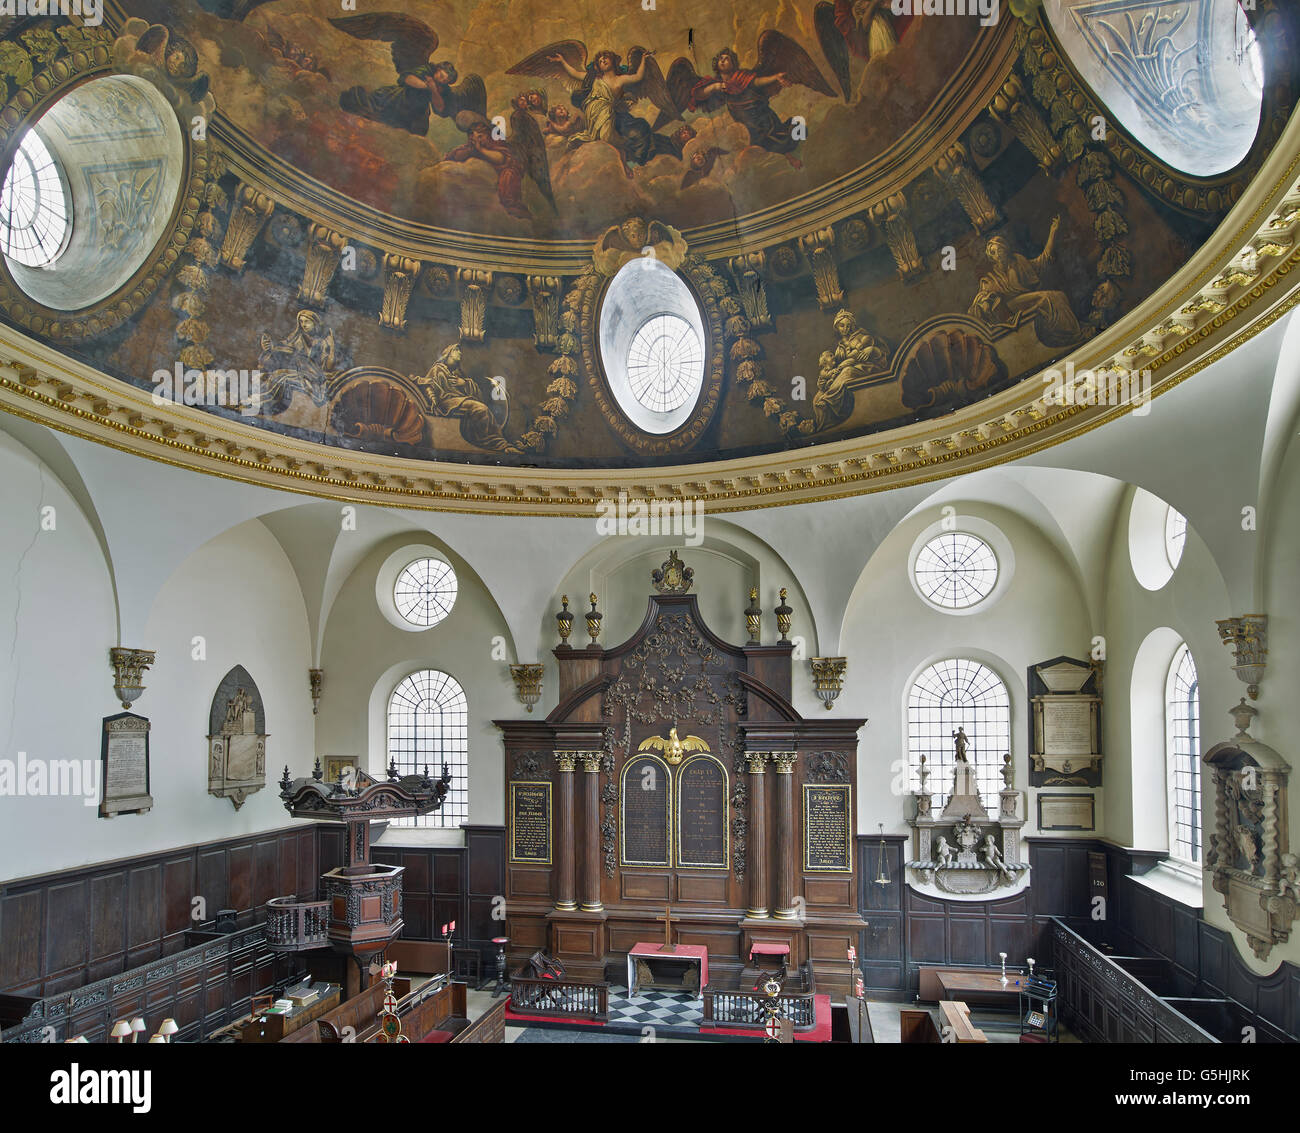 St Mary Abchurch, church in the City of London, interior with dome Stock Photo